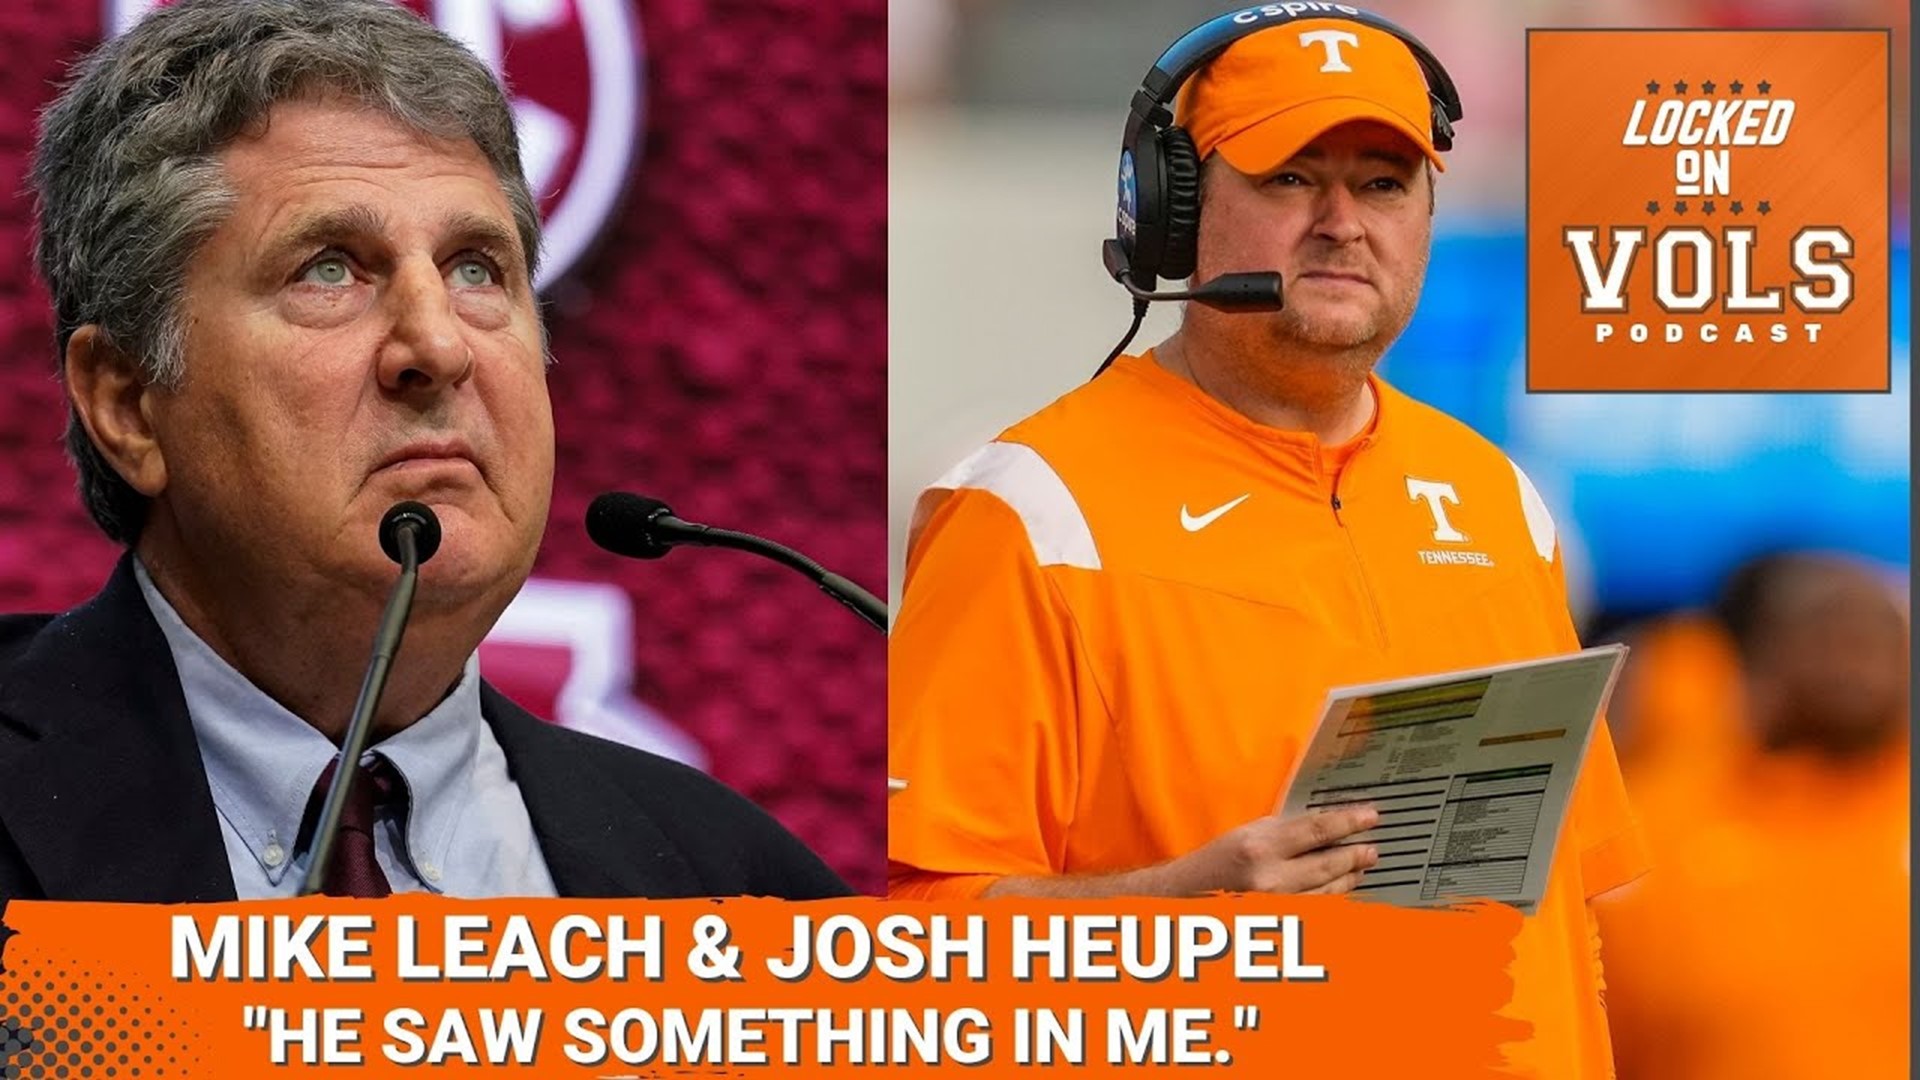 Mike Leach highlights modern era of offensive football. Tennessee Vols connections to Mike Leach